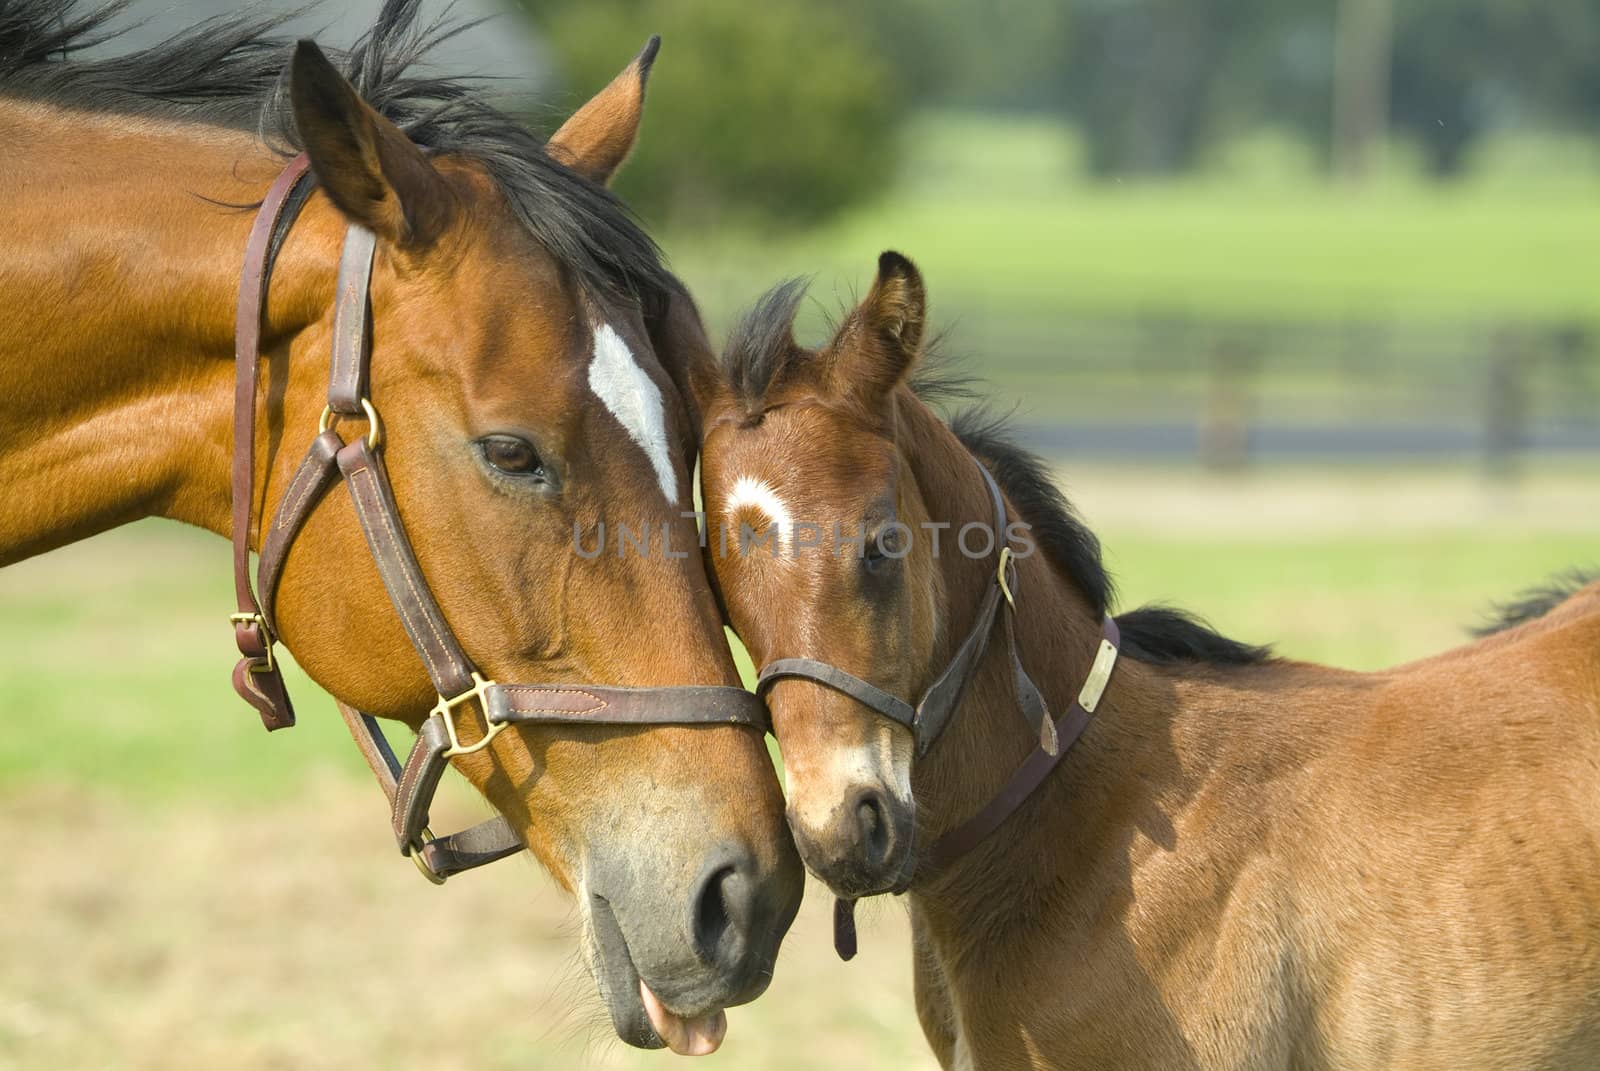 Horse gently cares about his colt